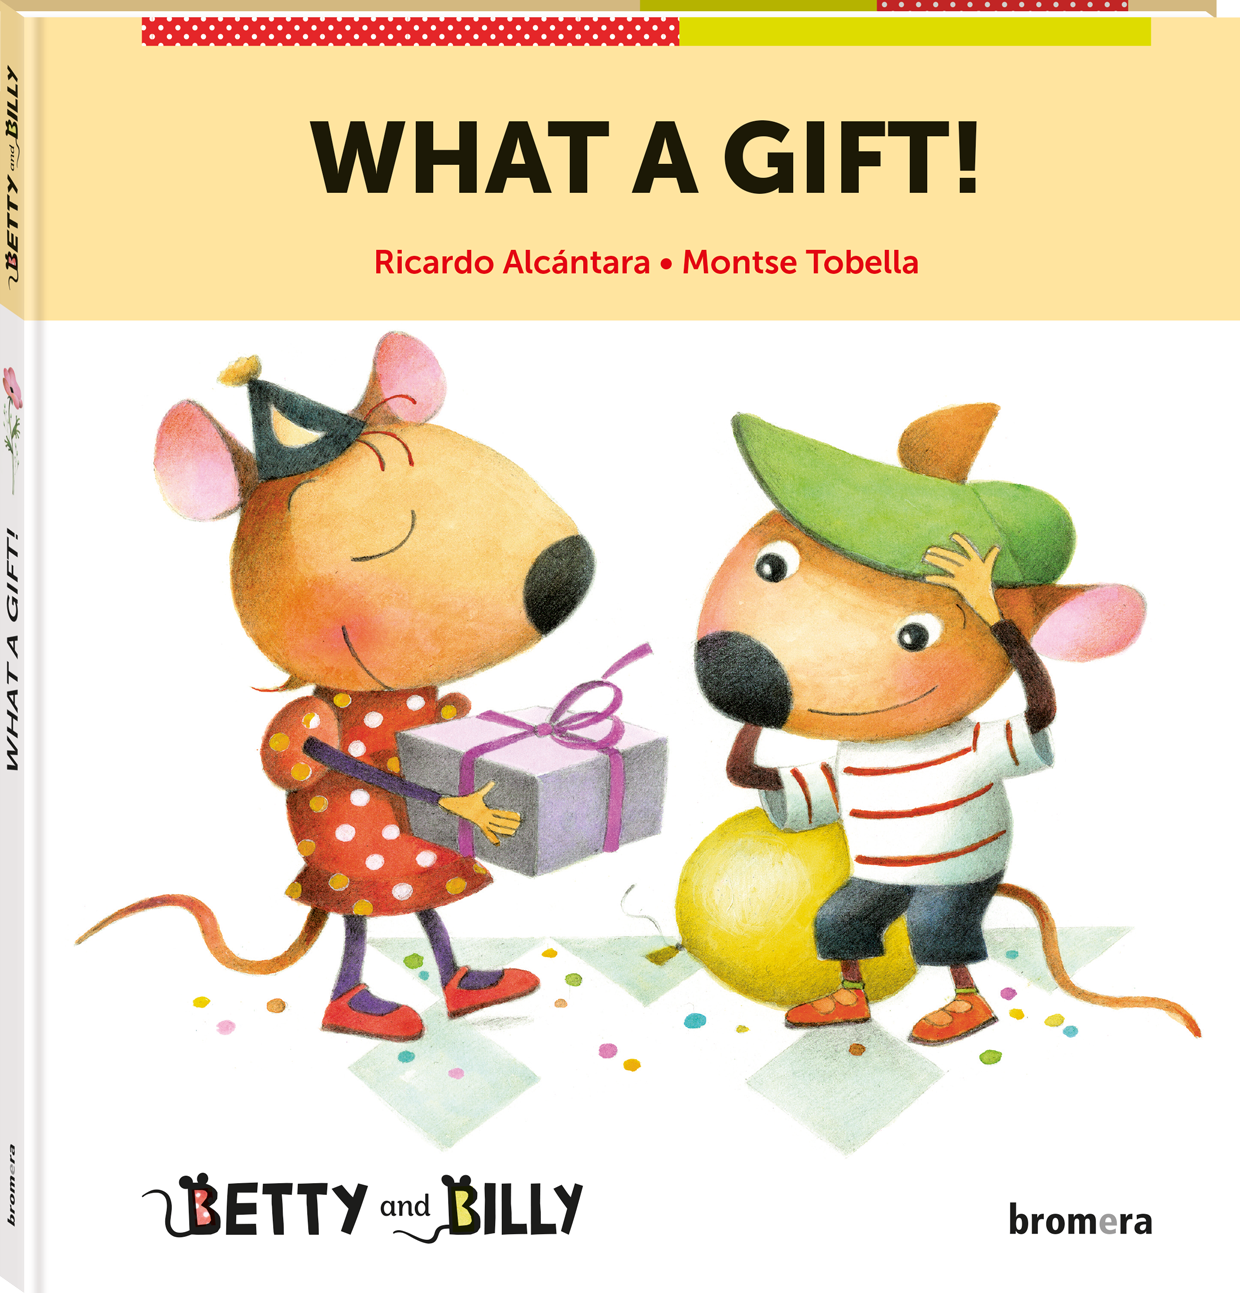 Betty and Billy Book Series